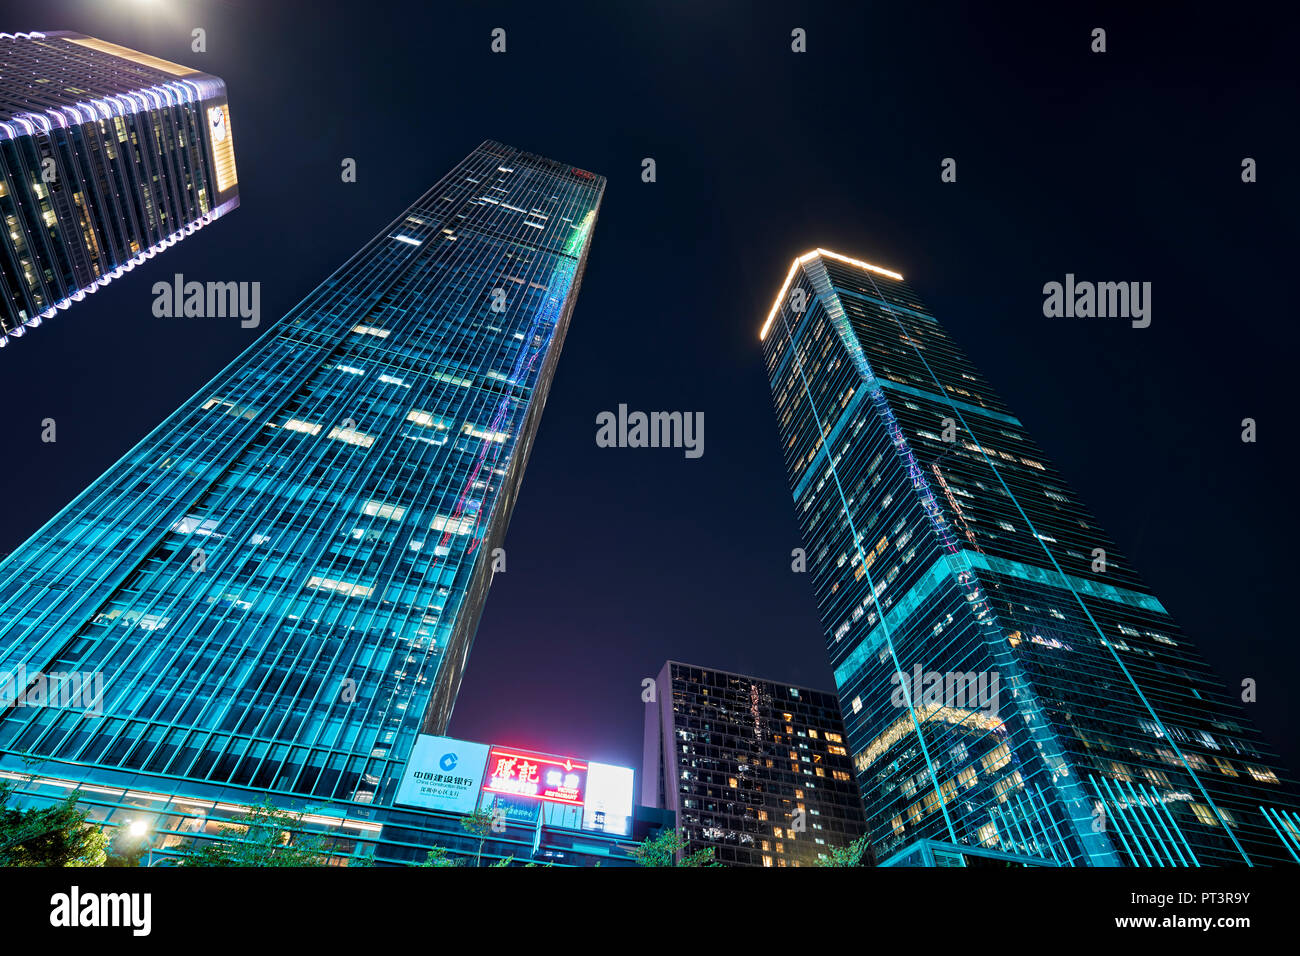 High-rise buildings in Futian Central Business District (CBD) illuminated at dusk. Shenzhen, Guangdong Province, China. Stock Photo